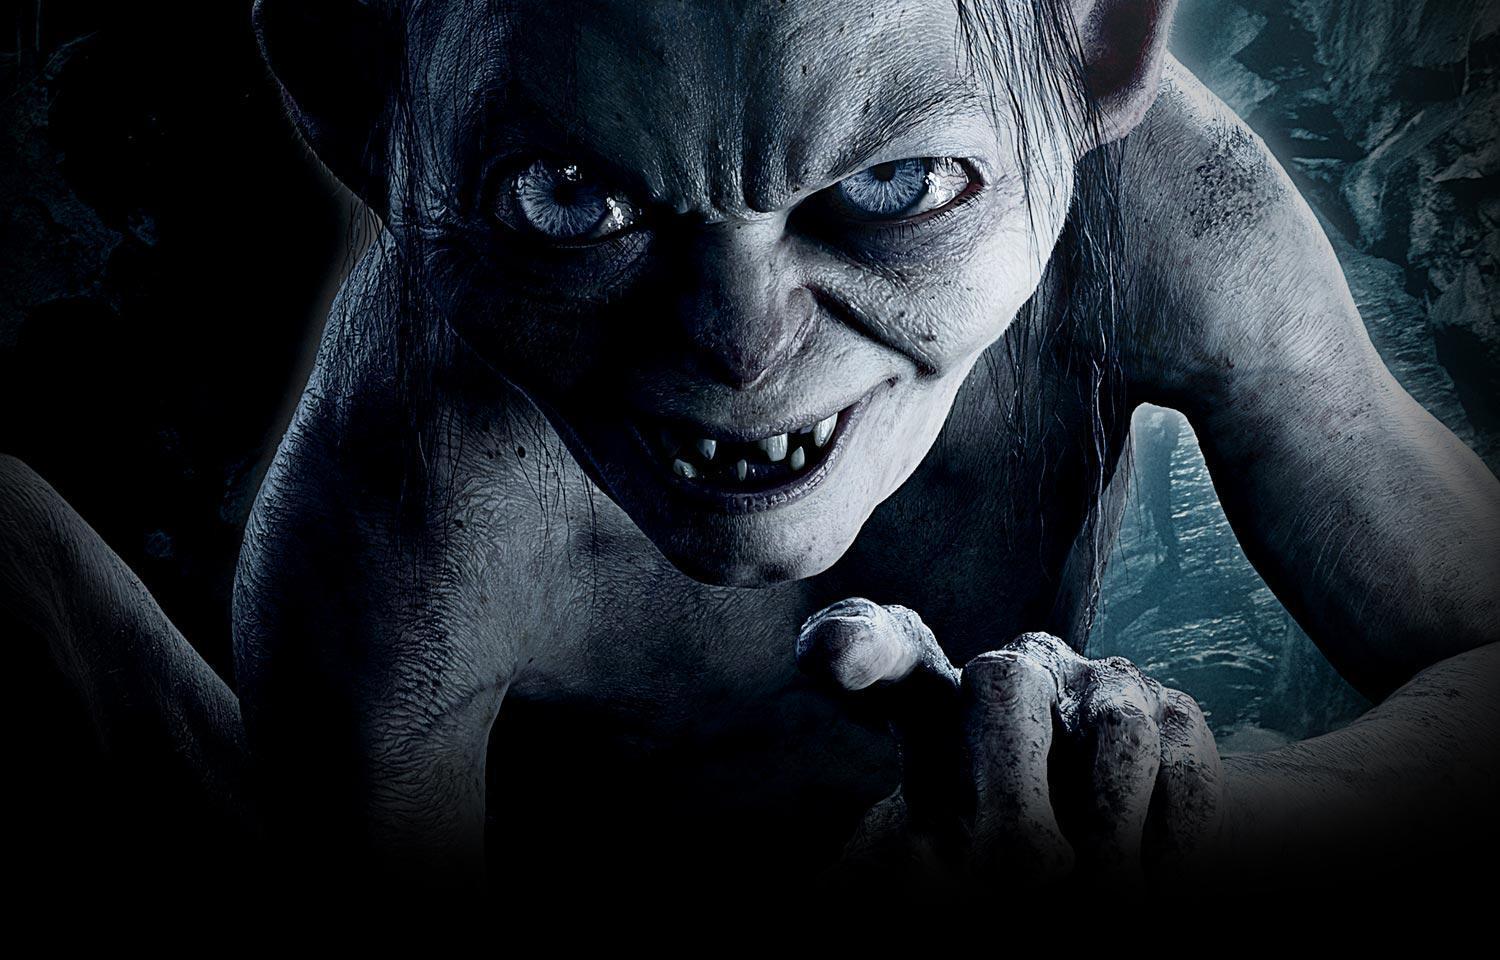 image For > Smeagol Actor Name